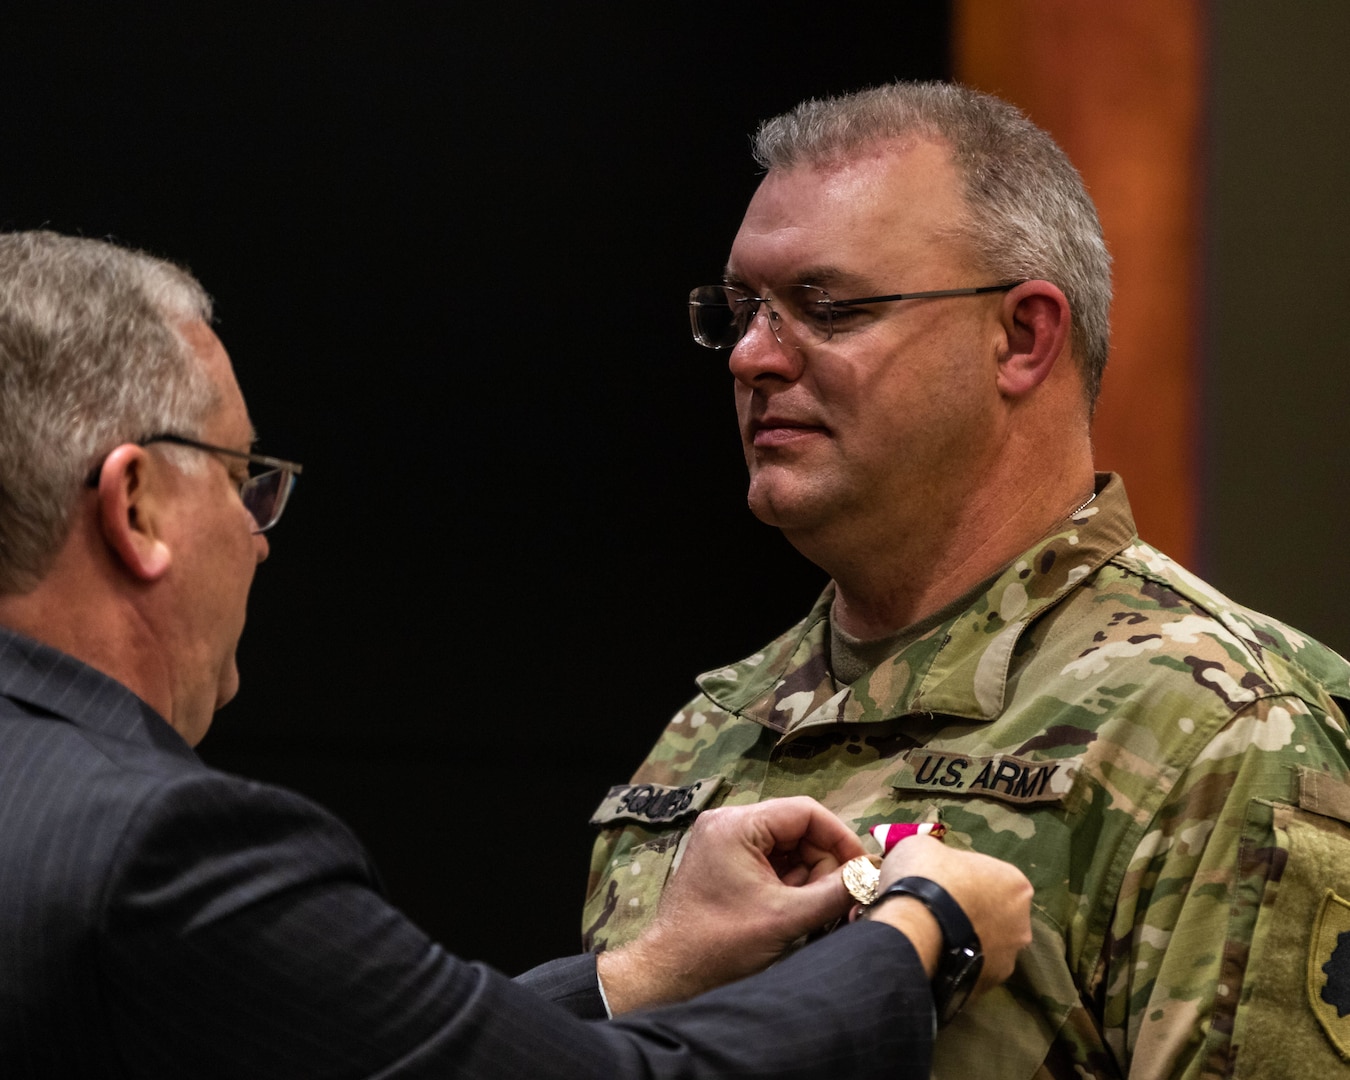 Joseph Schweickert, Director of Human Relations, Illinois National Guard, pins the Meritorious Service Medal to Master Sgt. Philip Squires during his retirement ceremony at Camp Lincoln, Springfield, Illinois, Oct. 30. Squires retired from the Illinois National Guard with 25 years of service. (U.S. Army Photo by Sgt. Stephen Gifford, Illinois National Guard Public Affairs)